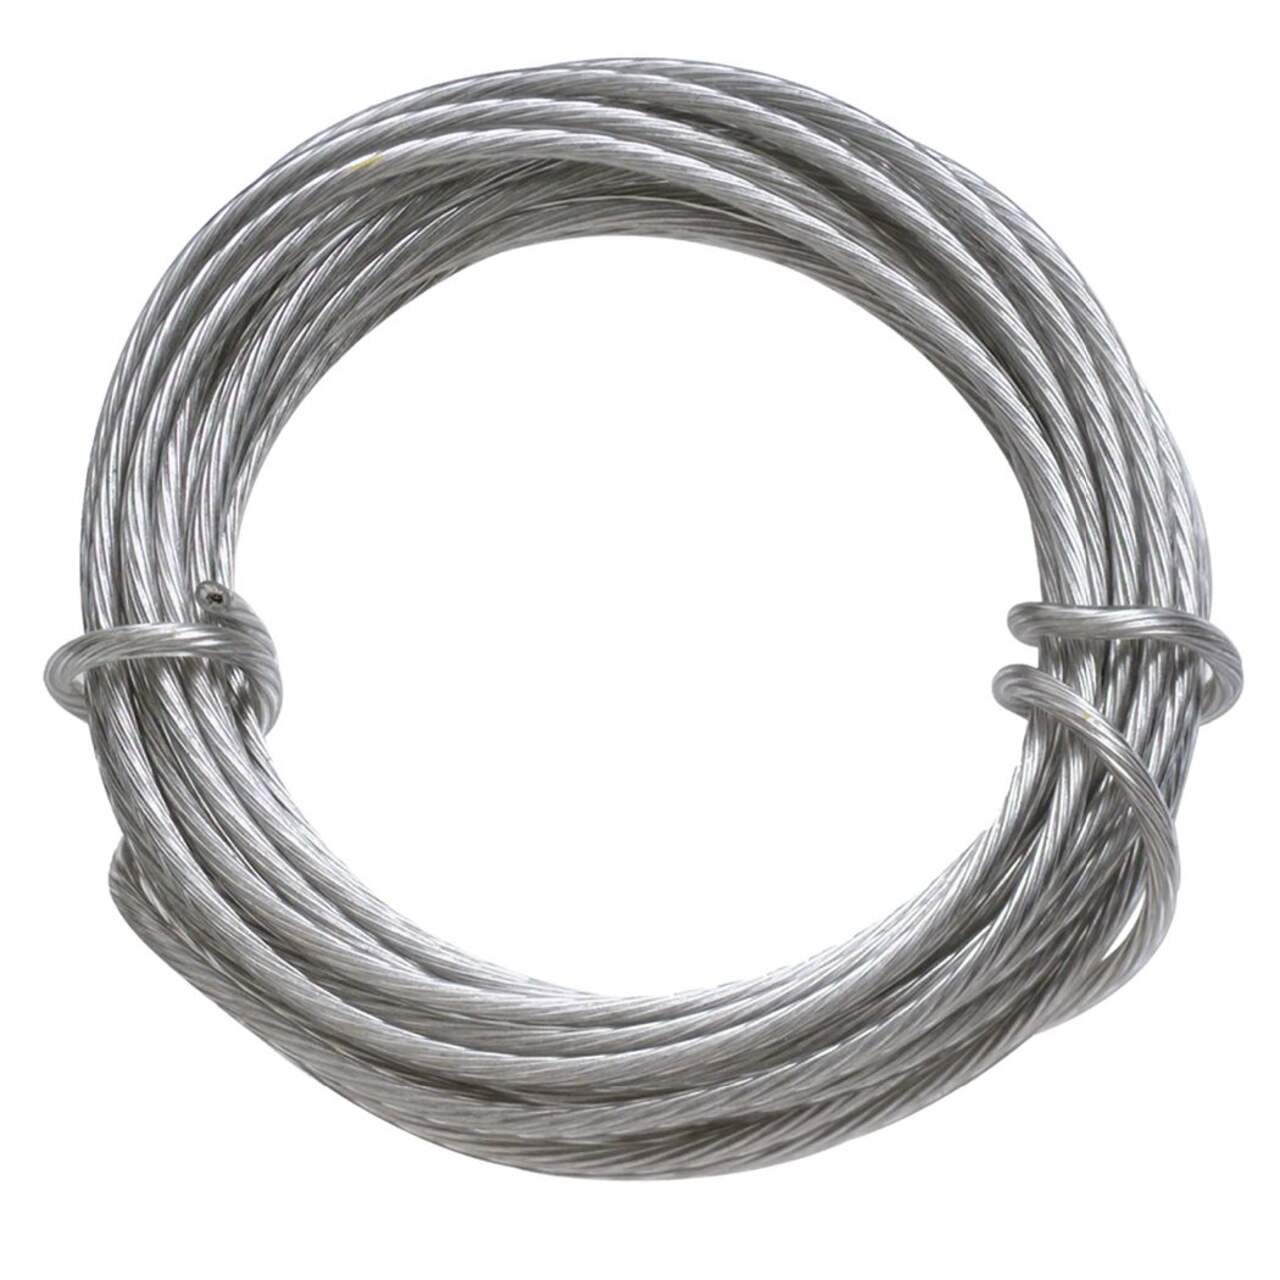 https://media-www.canadiantire.ca/product/fixing/hardware/general-hardware/1610721/9-framing-wire-30-lb-1-pack-466f2ce6-c4af-4375-b5b0-bad0cc838ce0-jpgrendition.jpg?imdensity=1&imwidth=640&impolicy=mZoom